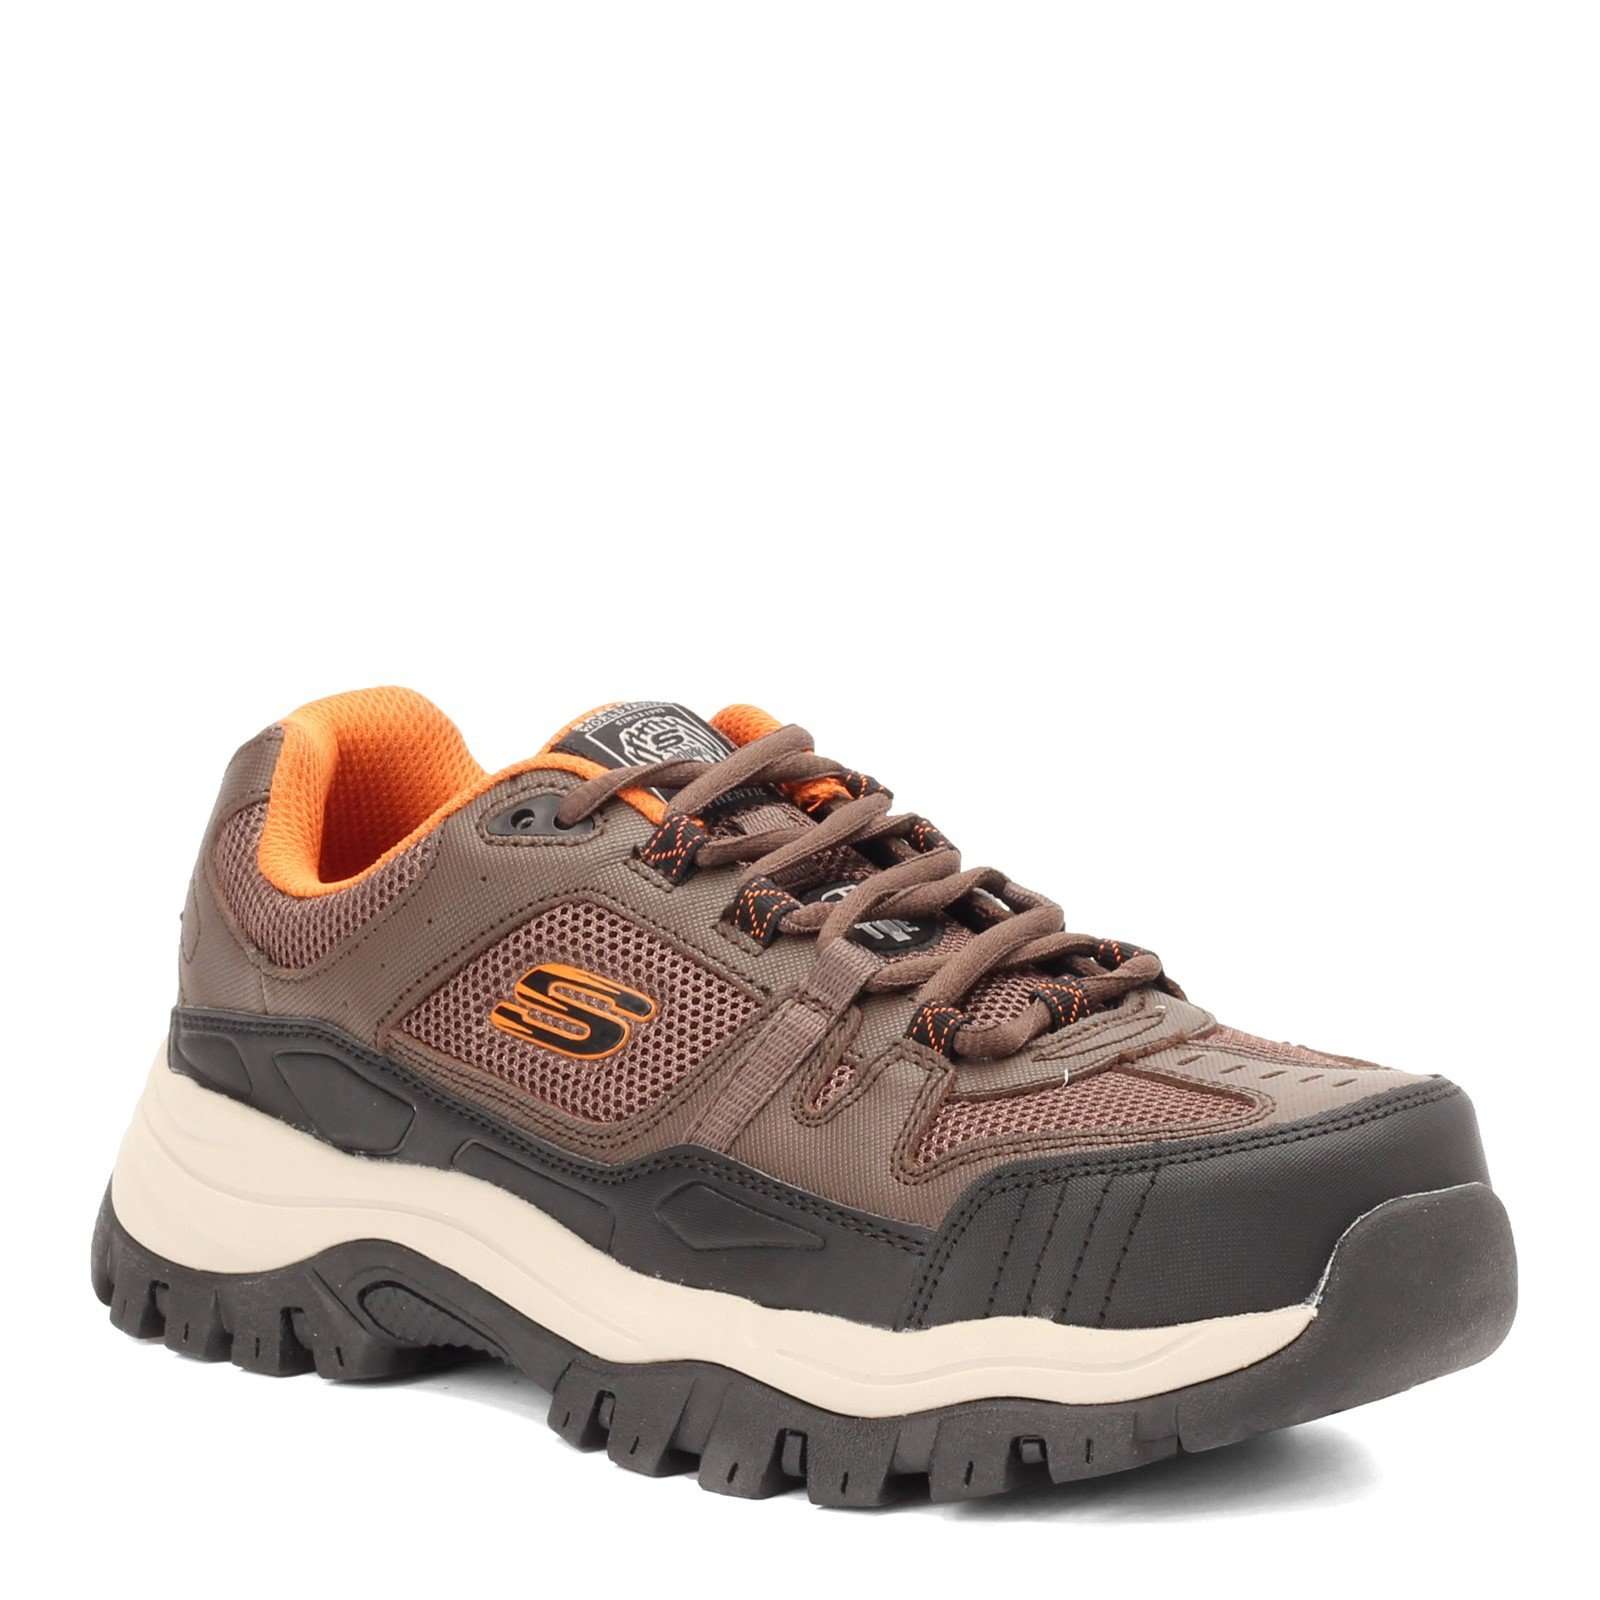 Are Skechers Good Work Shoes - LoveShoesClub.com